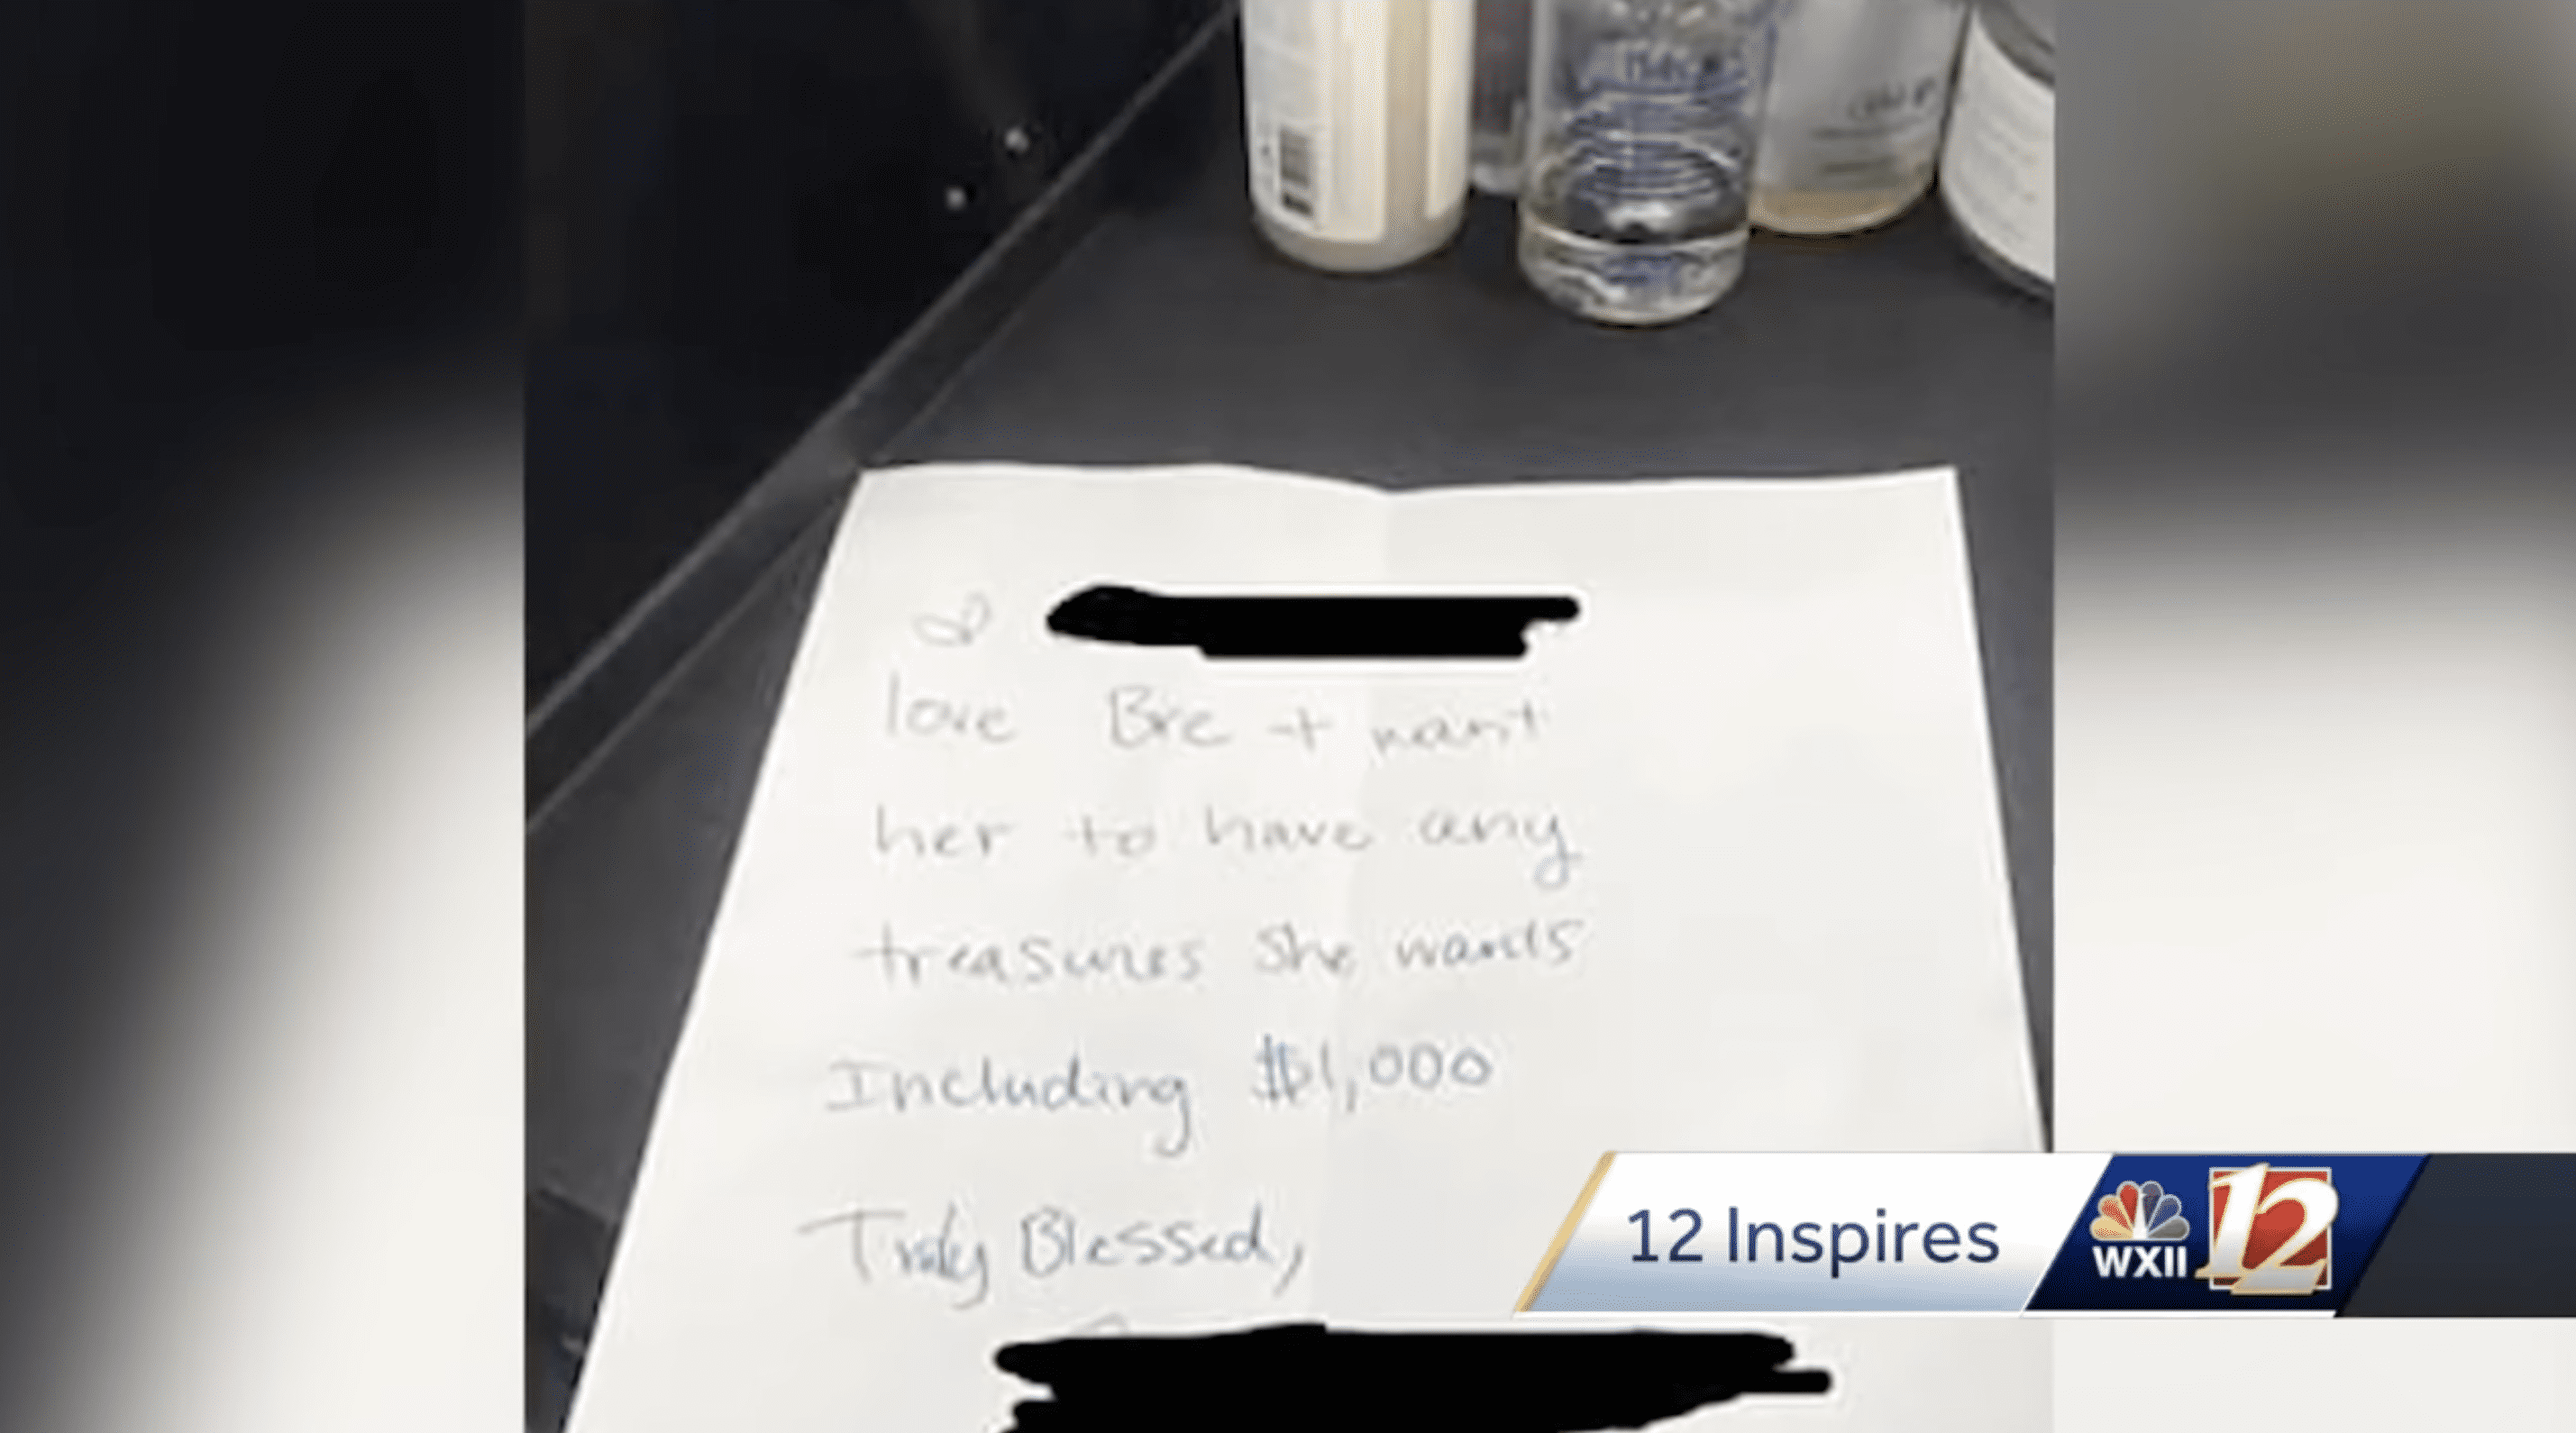 The client left Breanna a touching note. | Photo: youtube.com/wxii